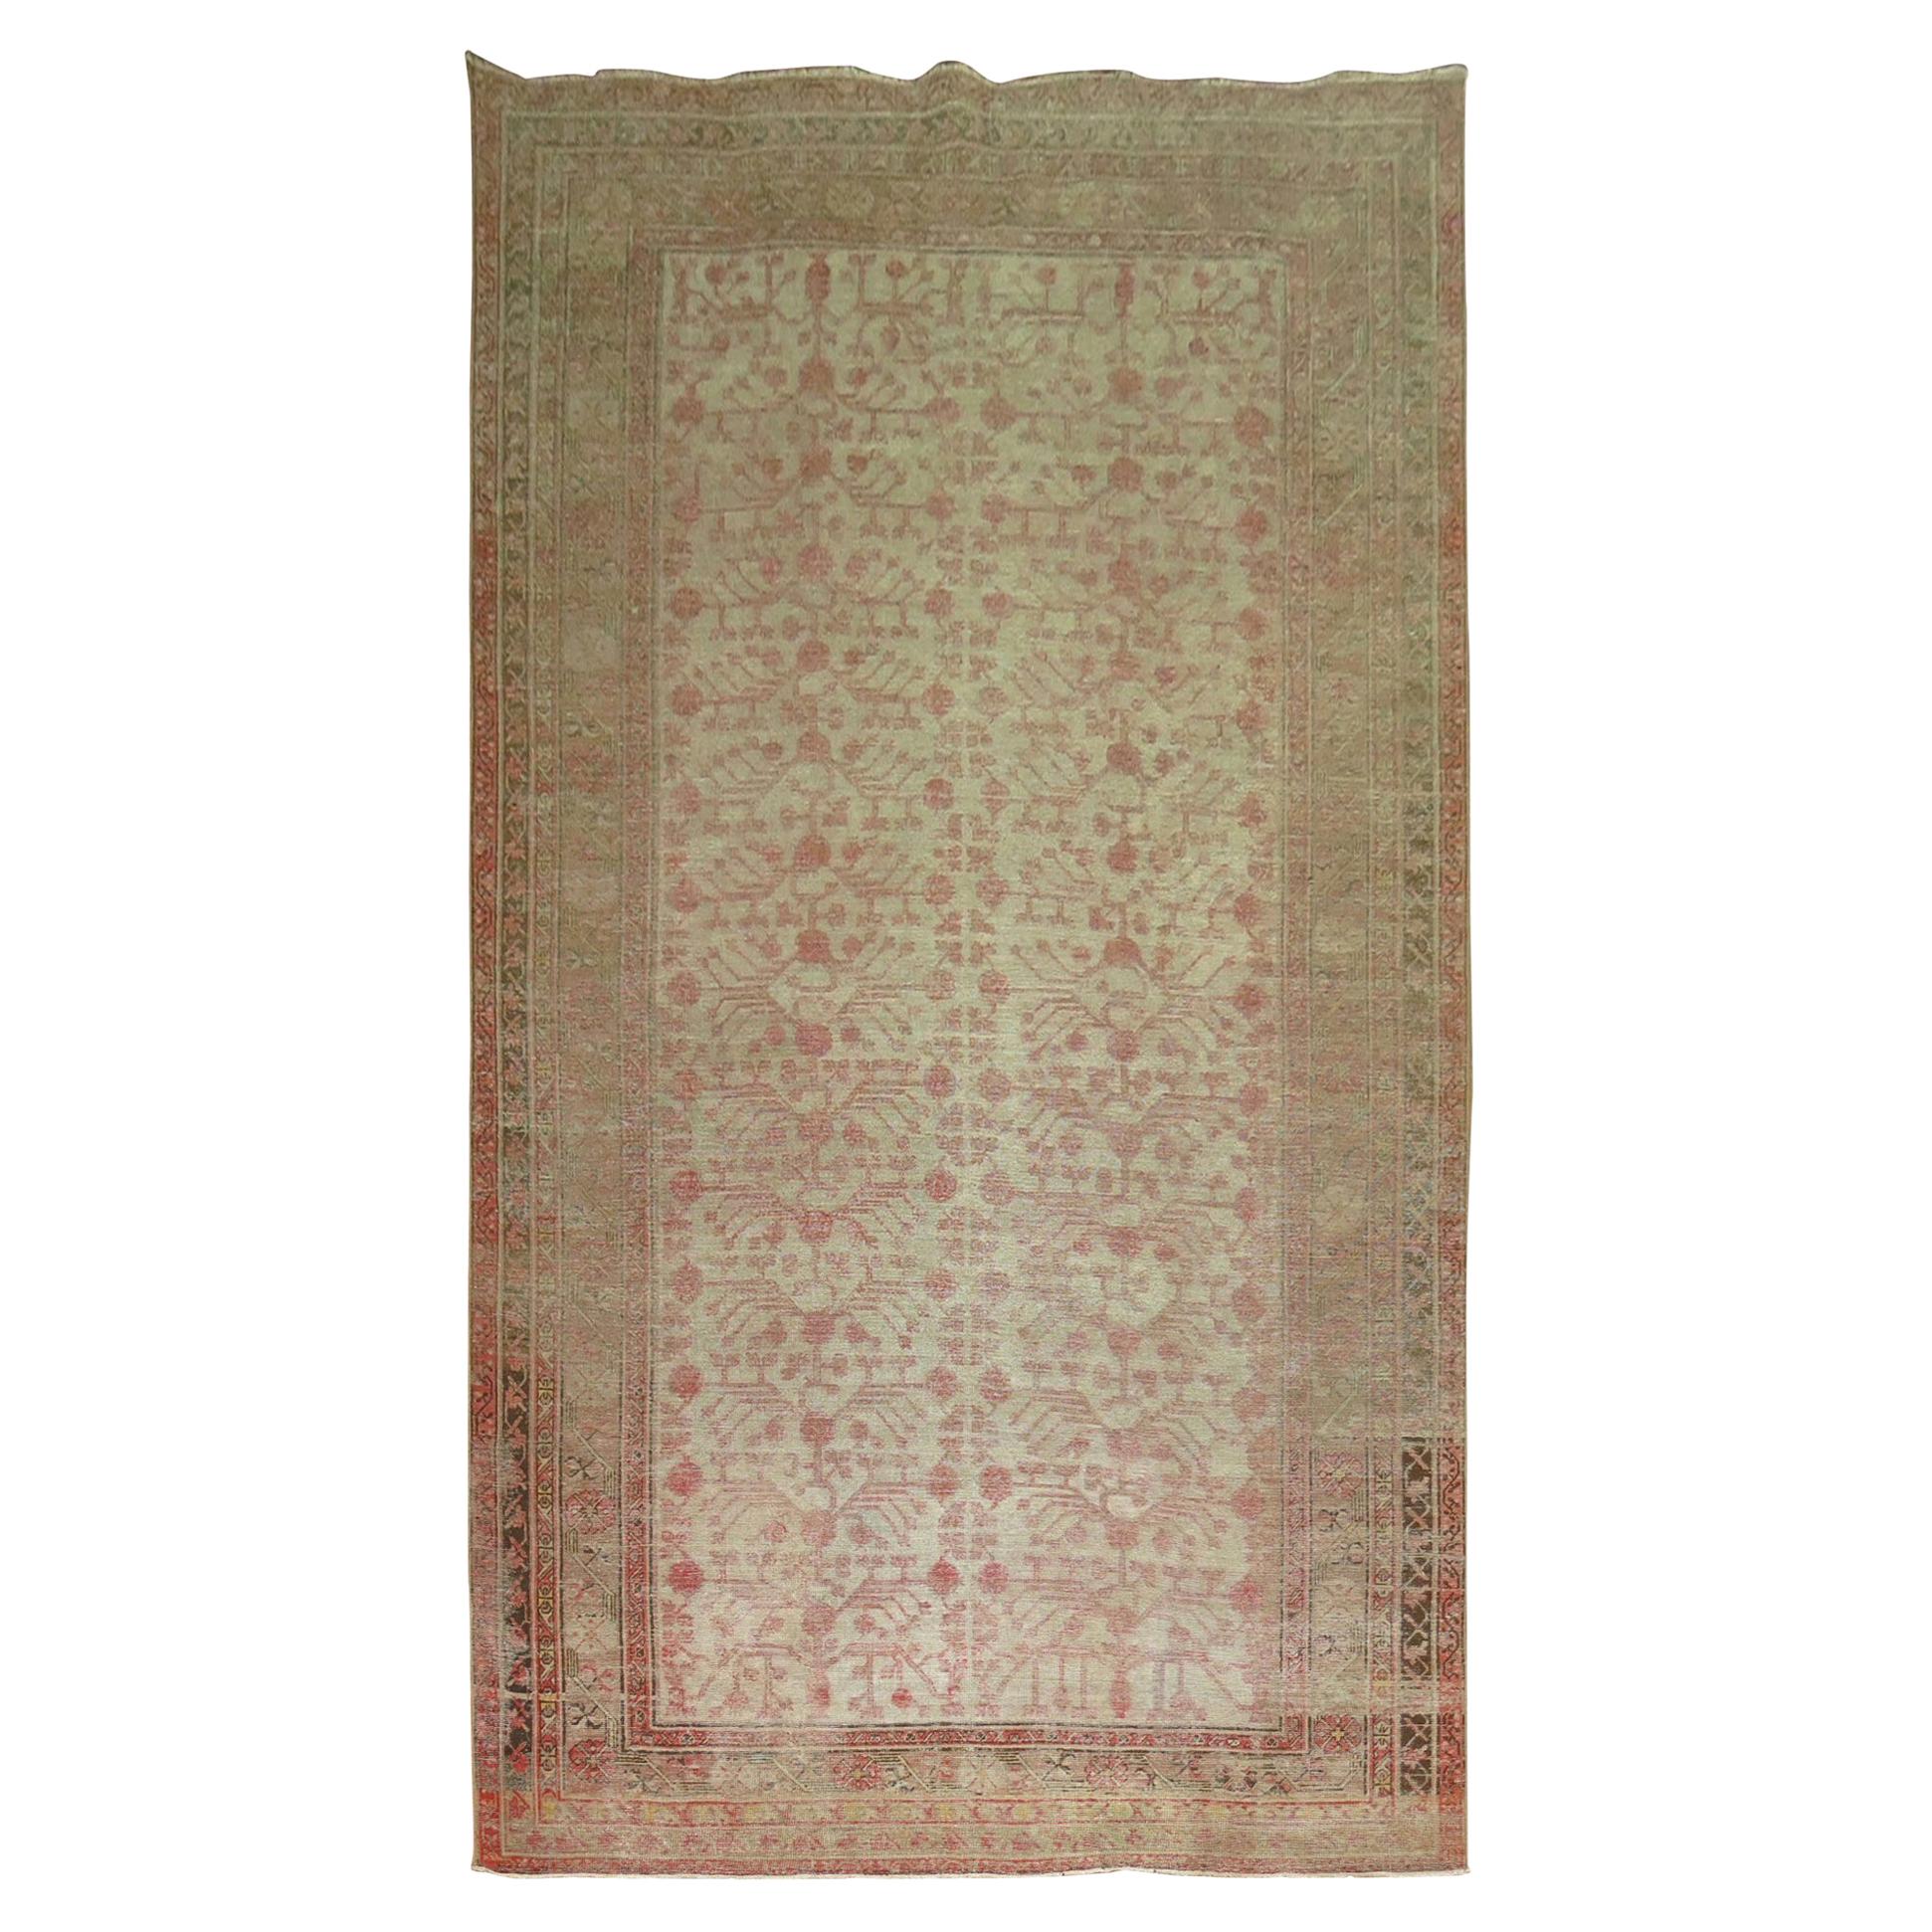 Pomegranate Khotan Shabby Chic Late 19th Century Large Gallery Size Rug For Sale